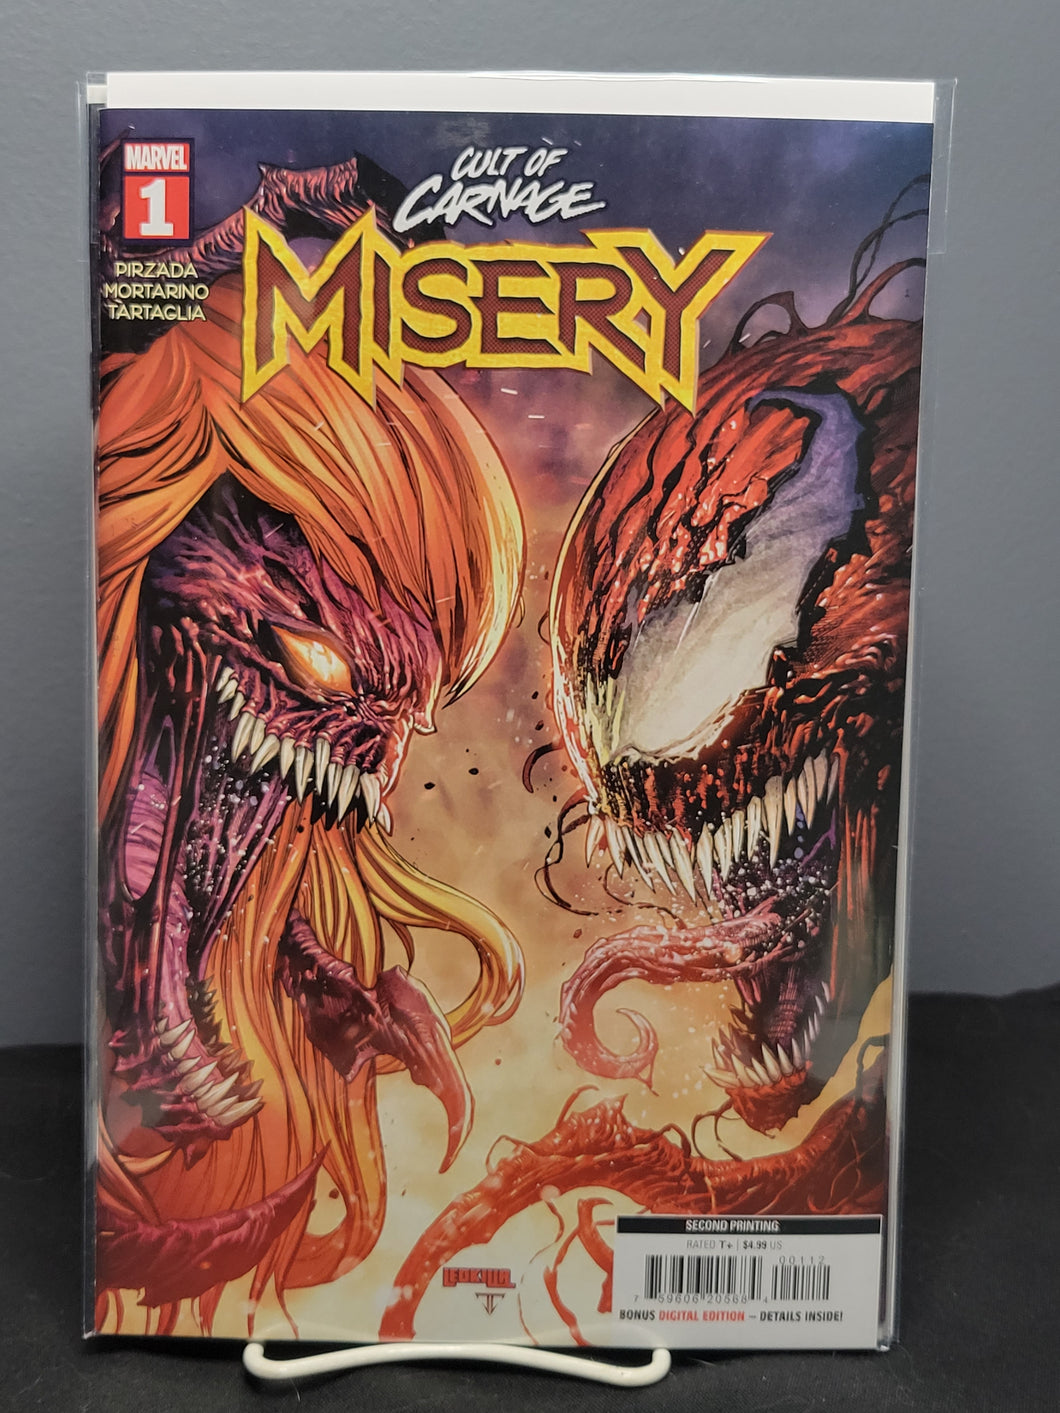 Cult Of Carnage Misery #1 2nd Print